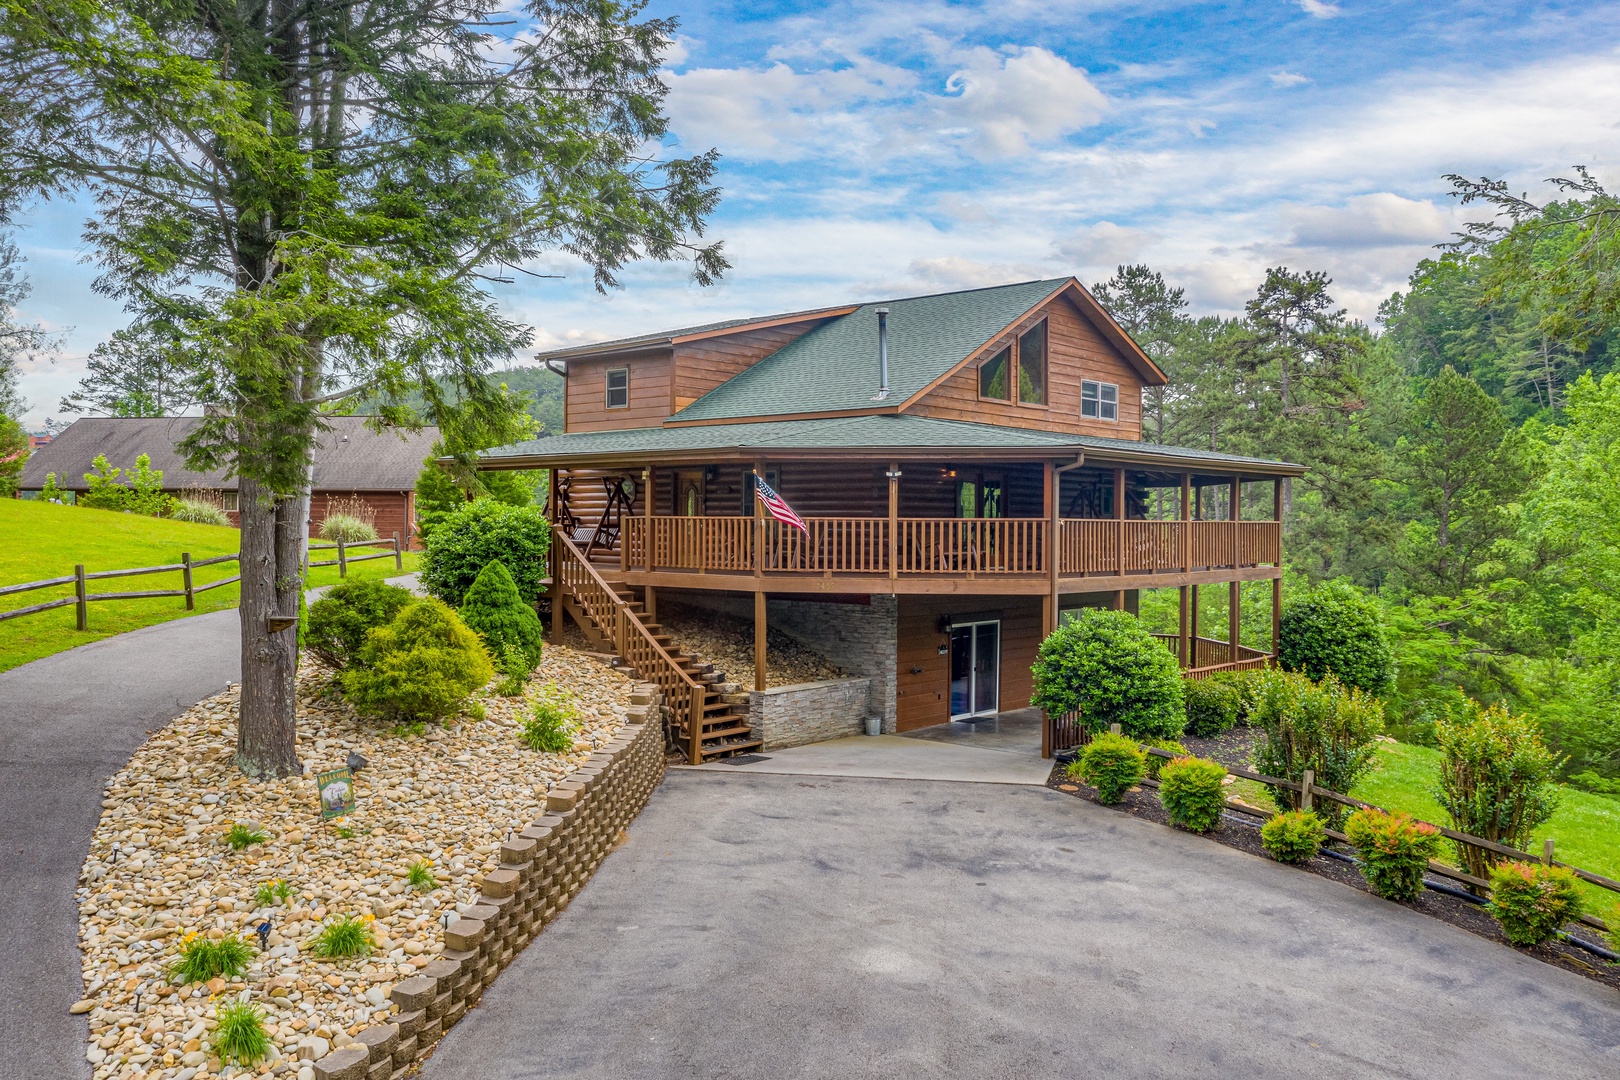 Driveway and cabin at Almost Bearadise, a 4 bedroom cabin rental located in Pigeon Forge